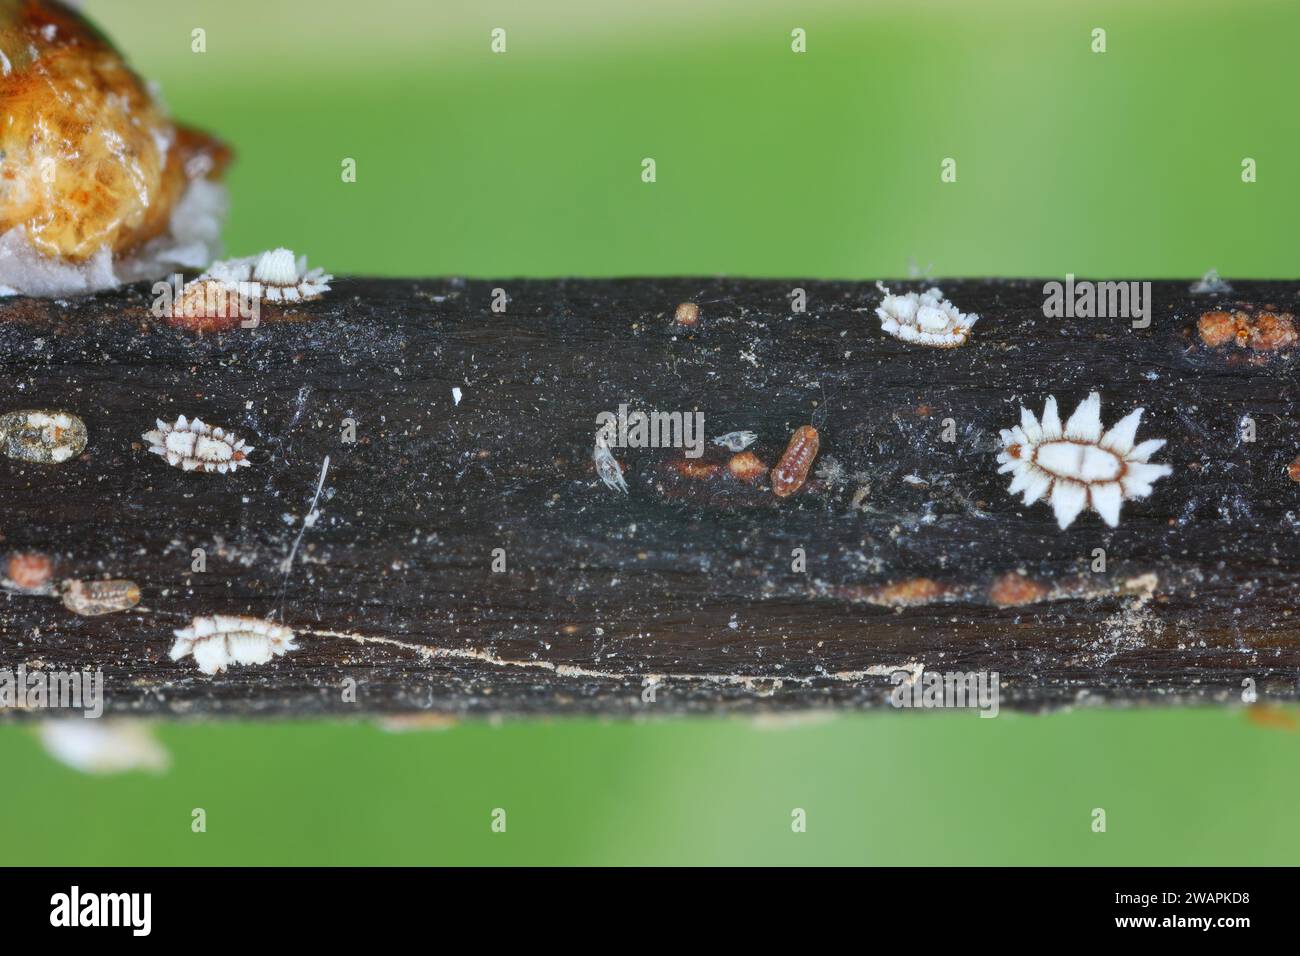 Fig wax scale (scientific name: Ceroplastes rusci, Coccidae). Insect reported as a significant pest of citrus and many other crops and ornamental Stock Photo